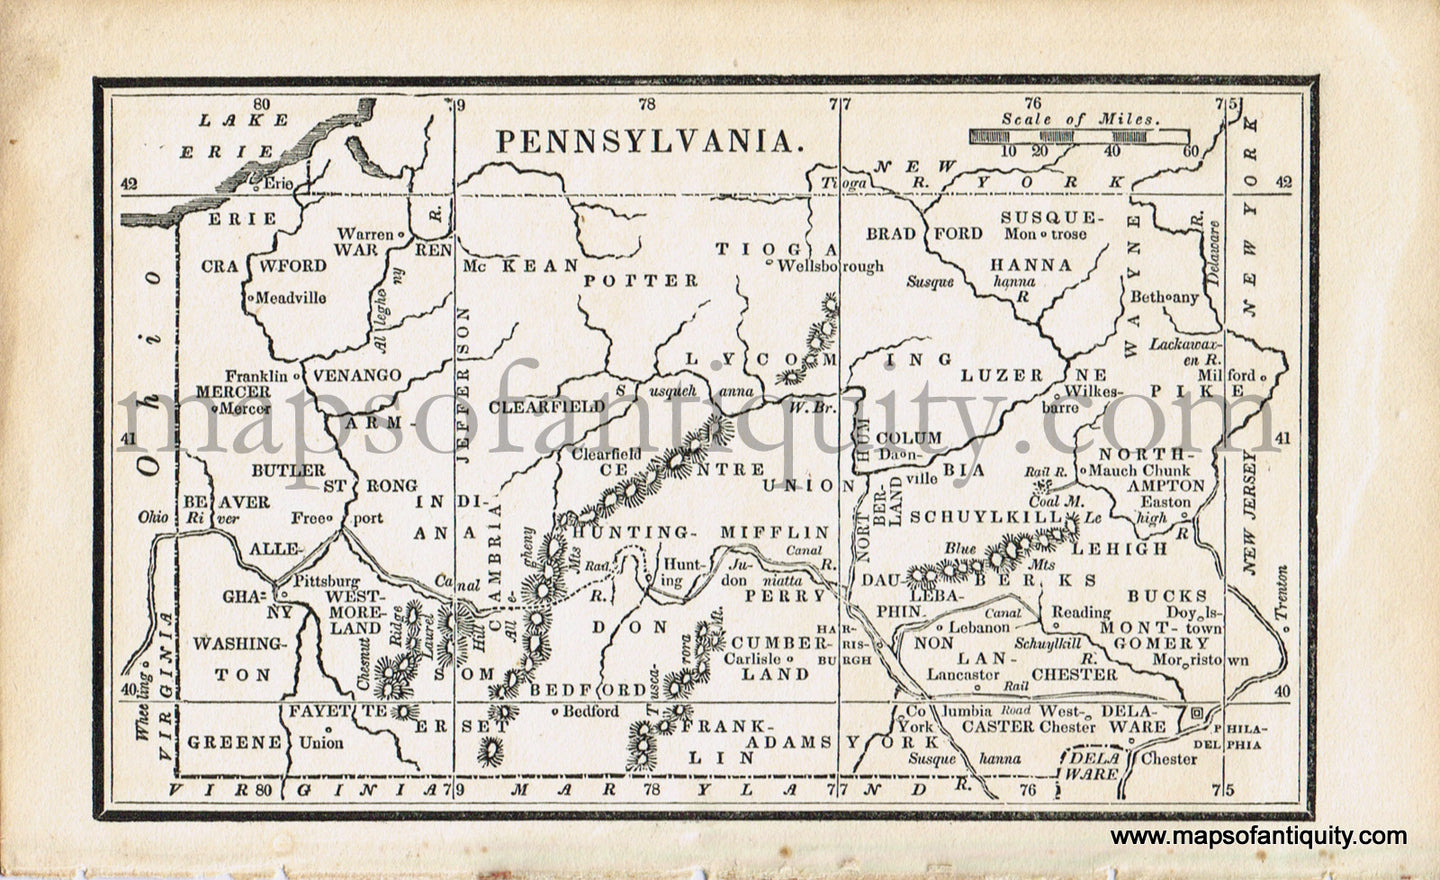 Antique-Black-and-White-Map-Pennsylvania-United-States-Mid-Atlantic-1830-Boston-School-Geography-Maps-Of-Antiquity